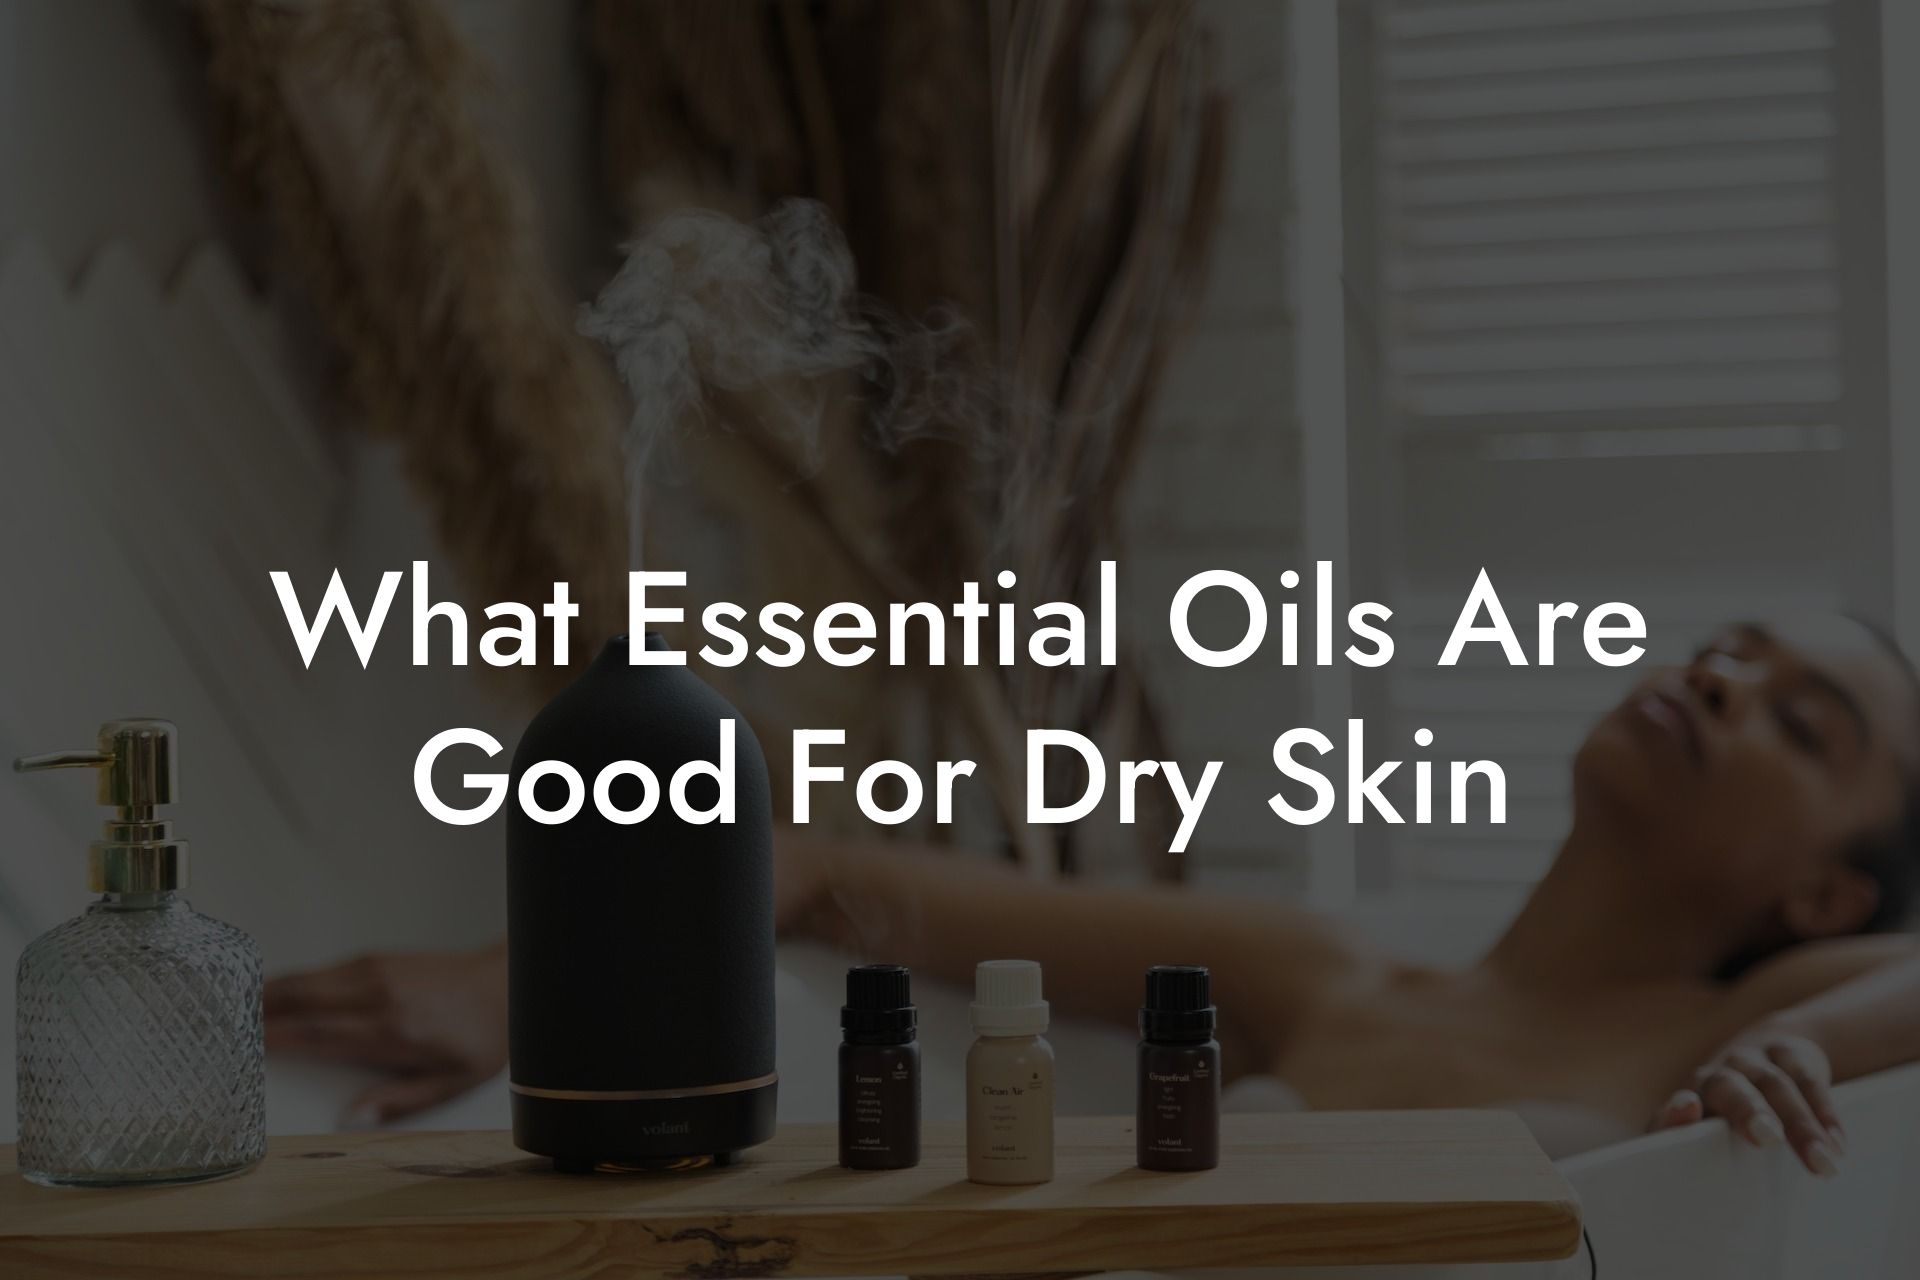 What Essential Oils Are Good For Dry Skin